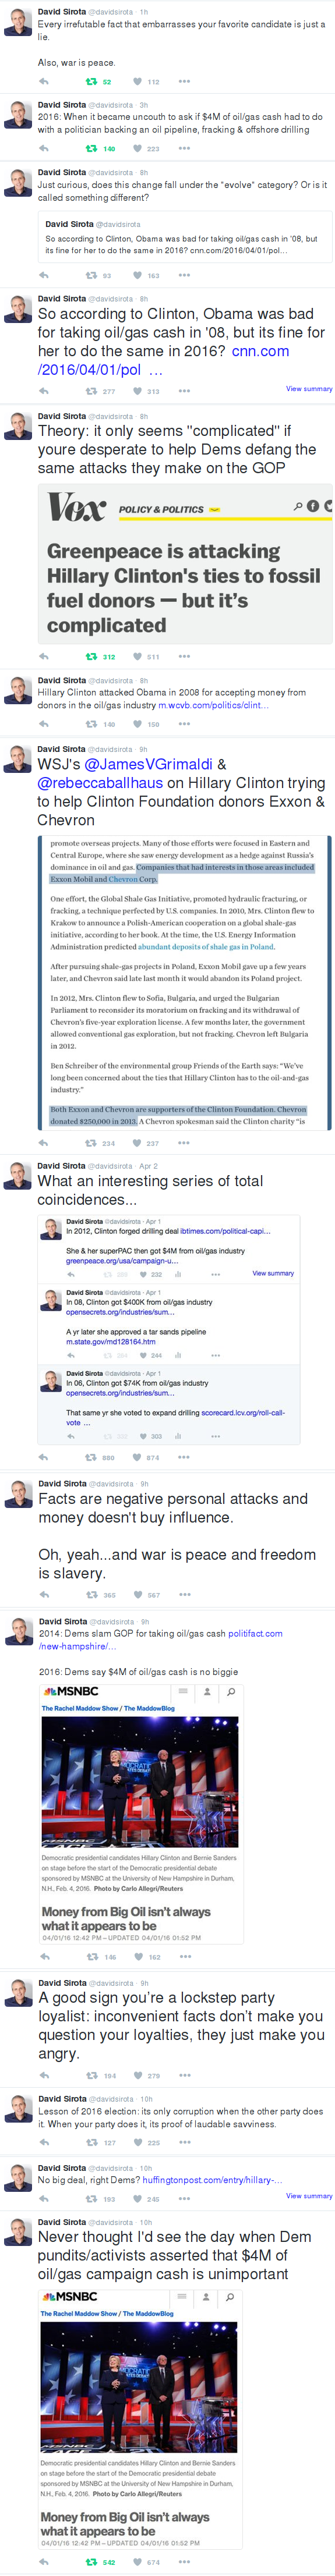 Some tweets from David Sirota, April 2-3, 2016. Screenshots stitched together by author, fair use.